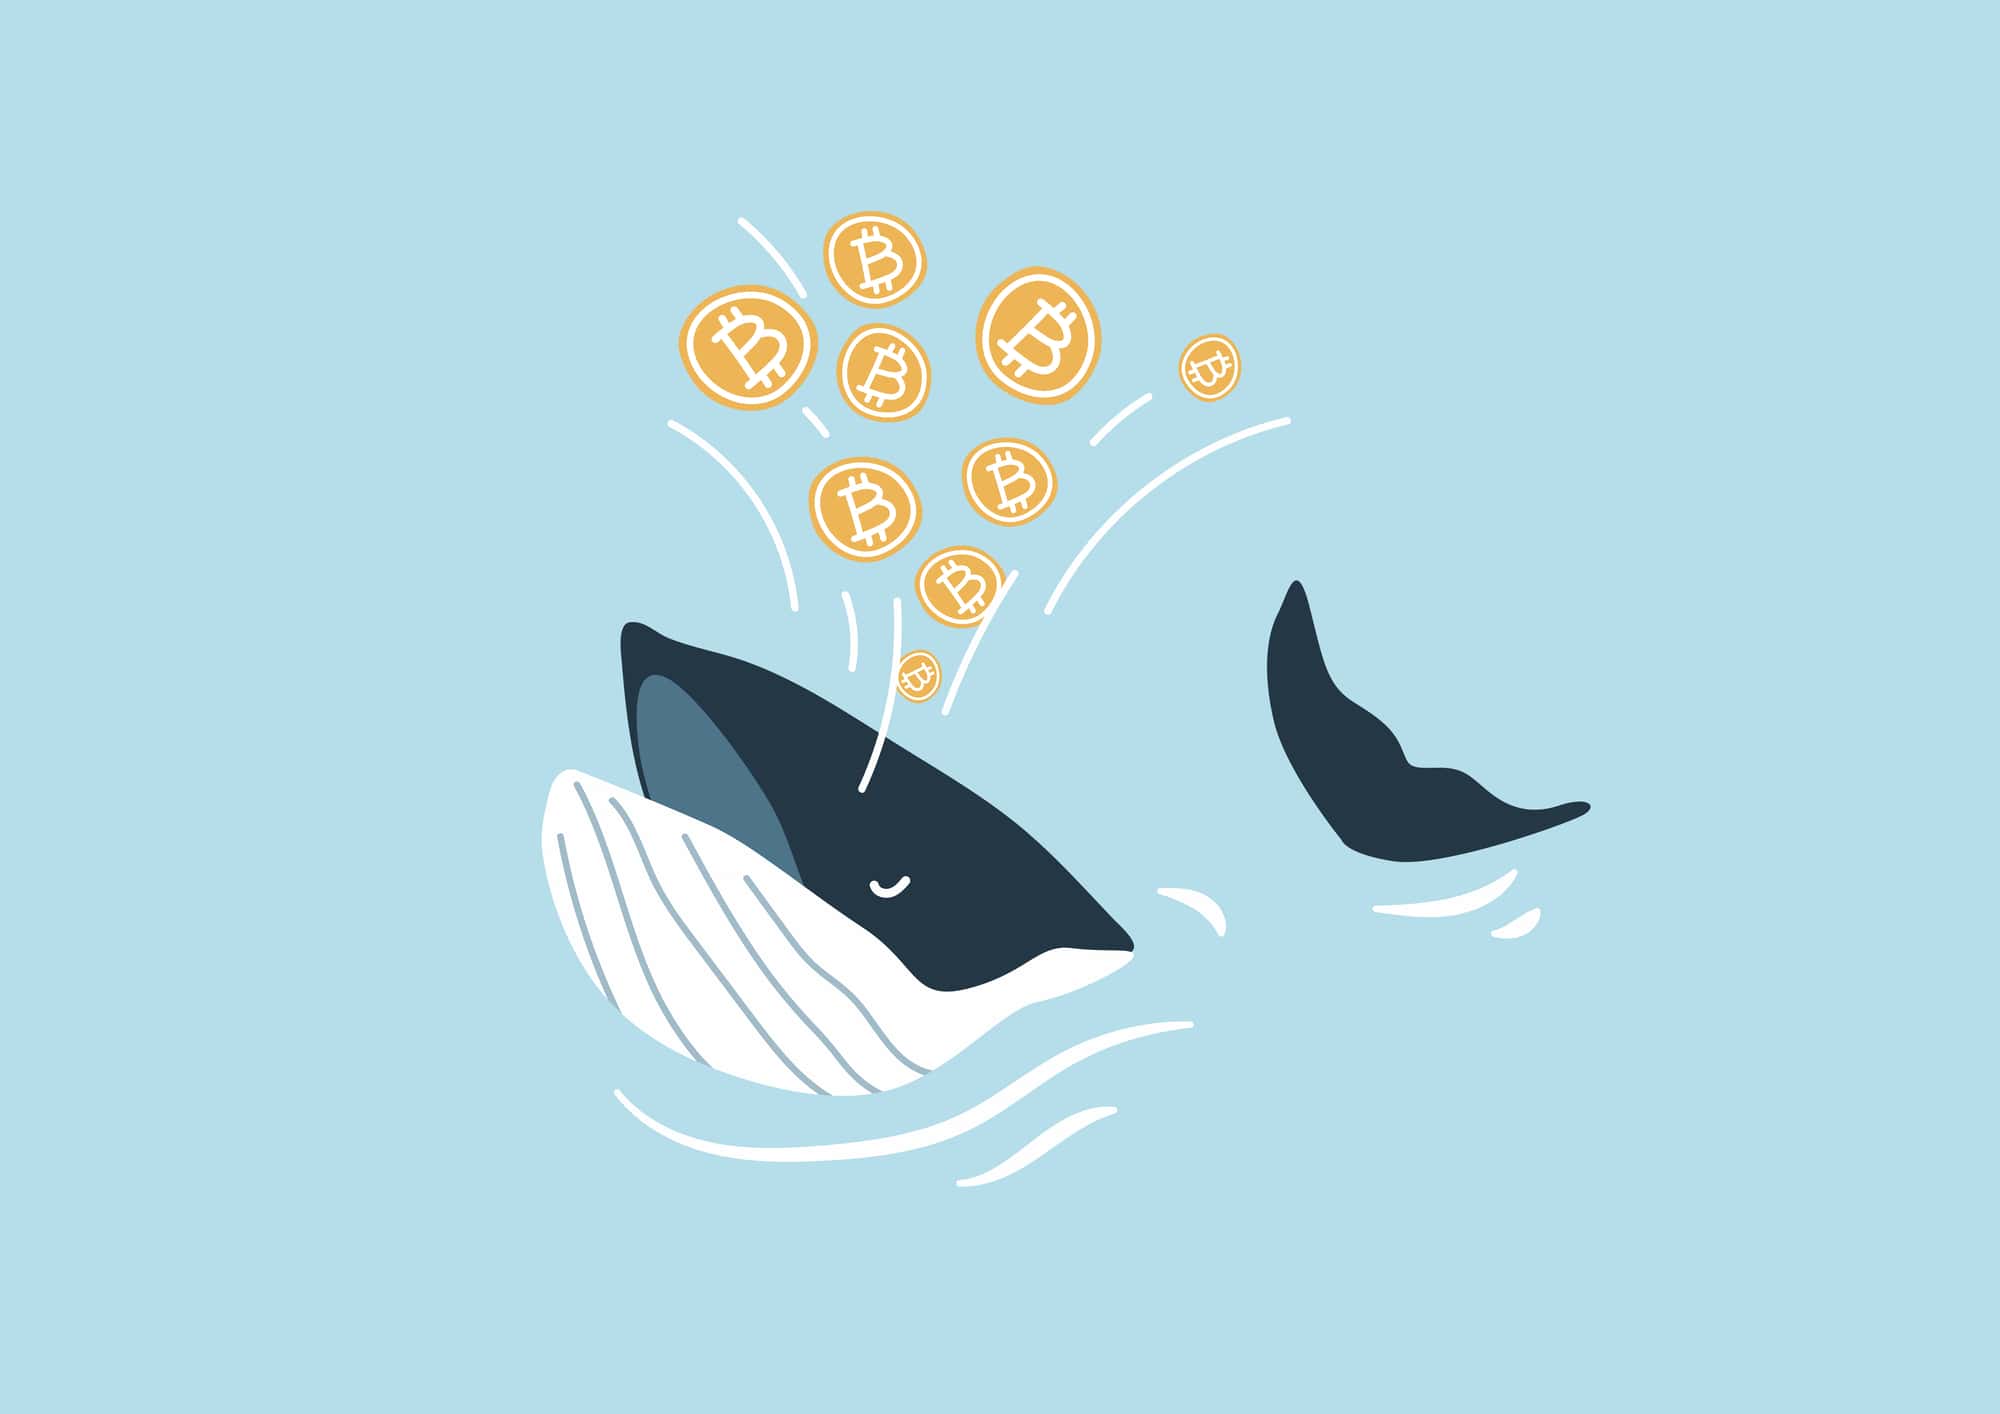 Whales are depositing Bitcoin to exchanges despite BTC reserves hitting lows